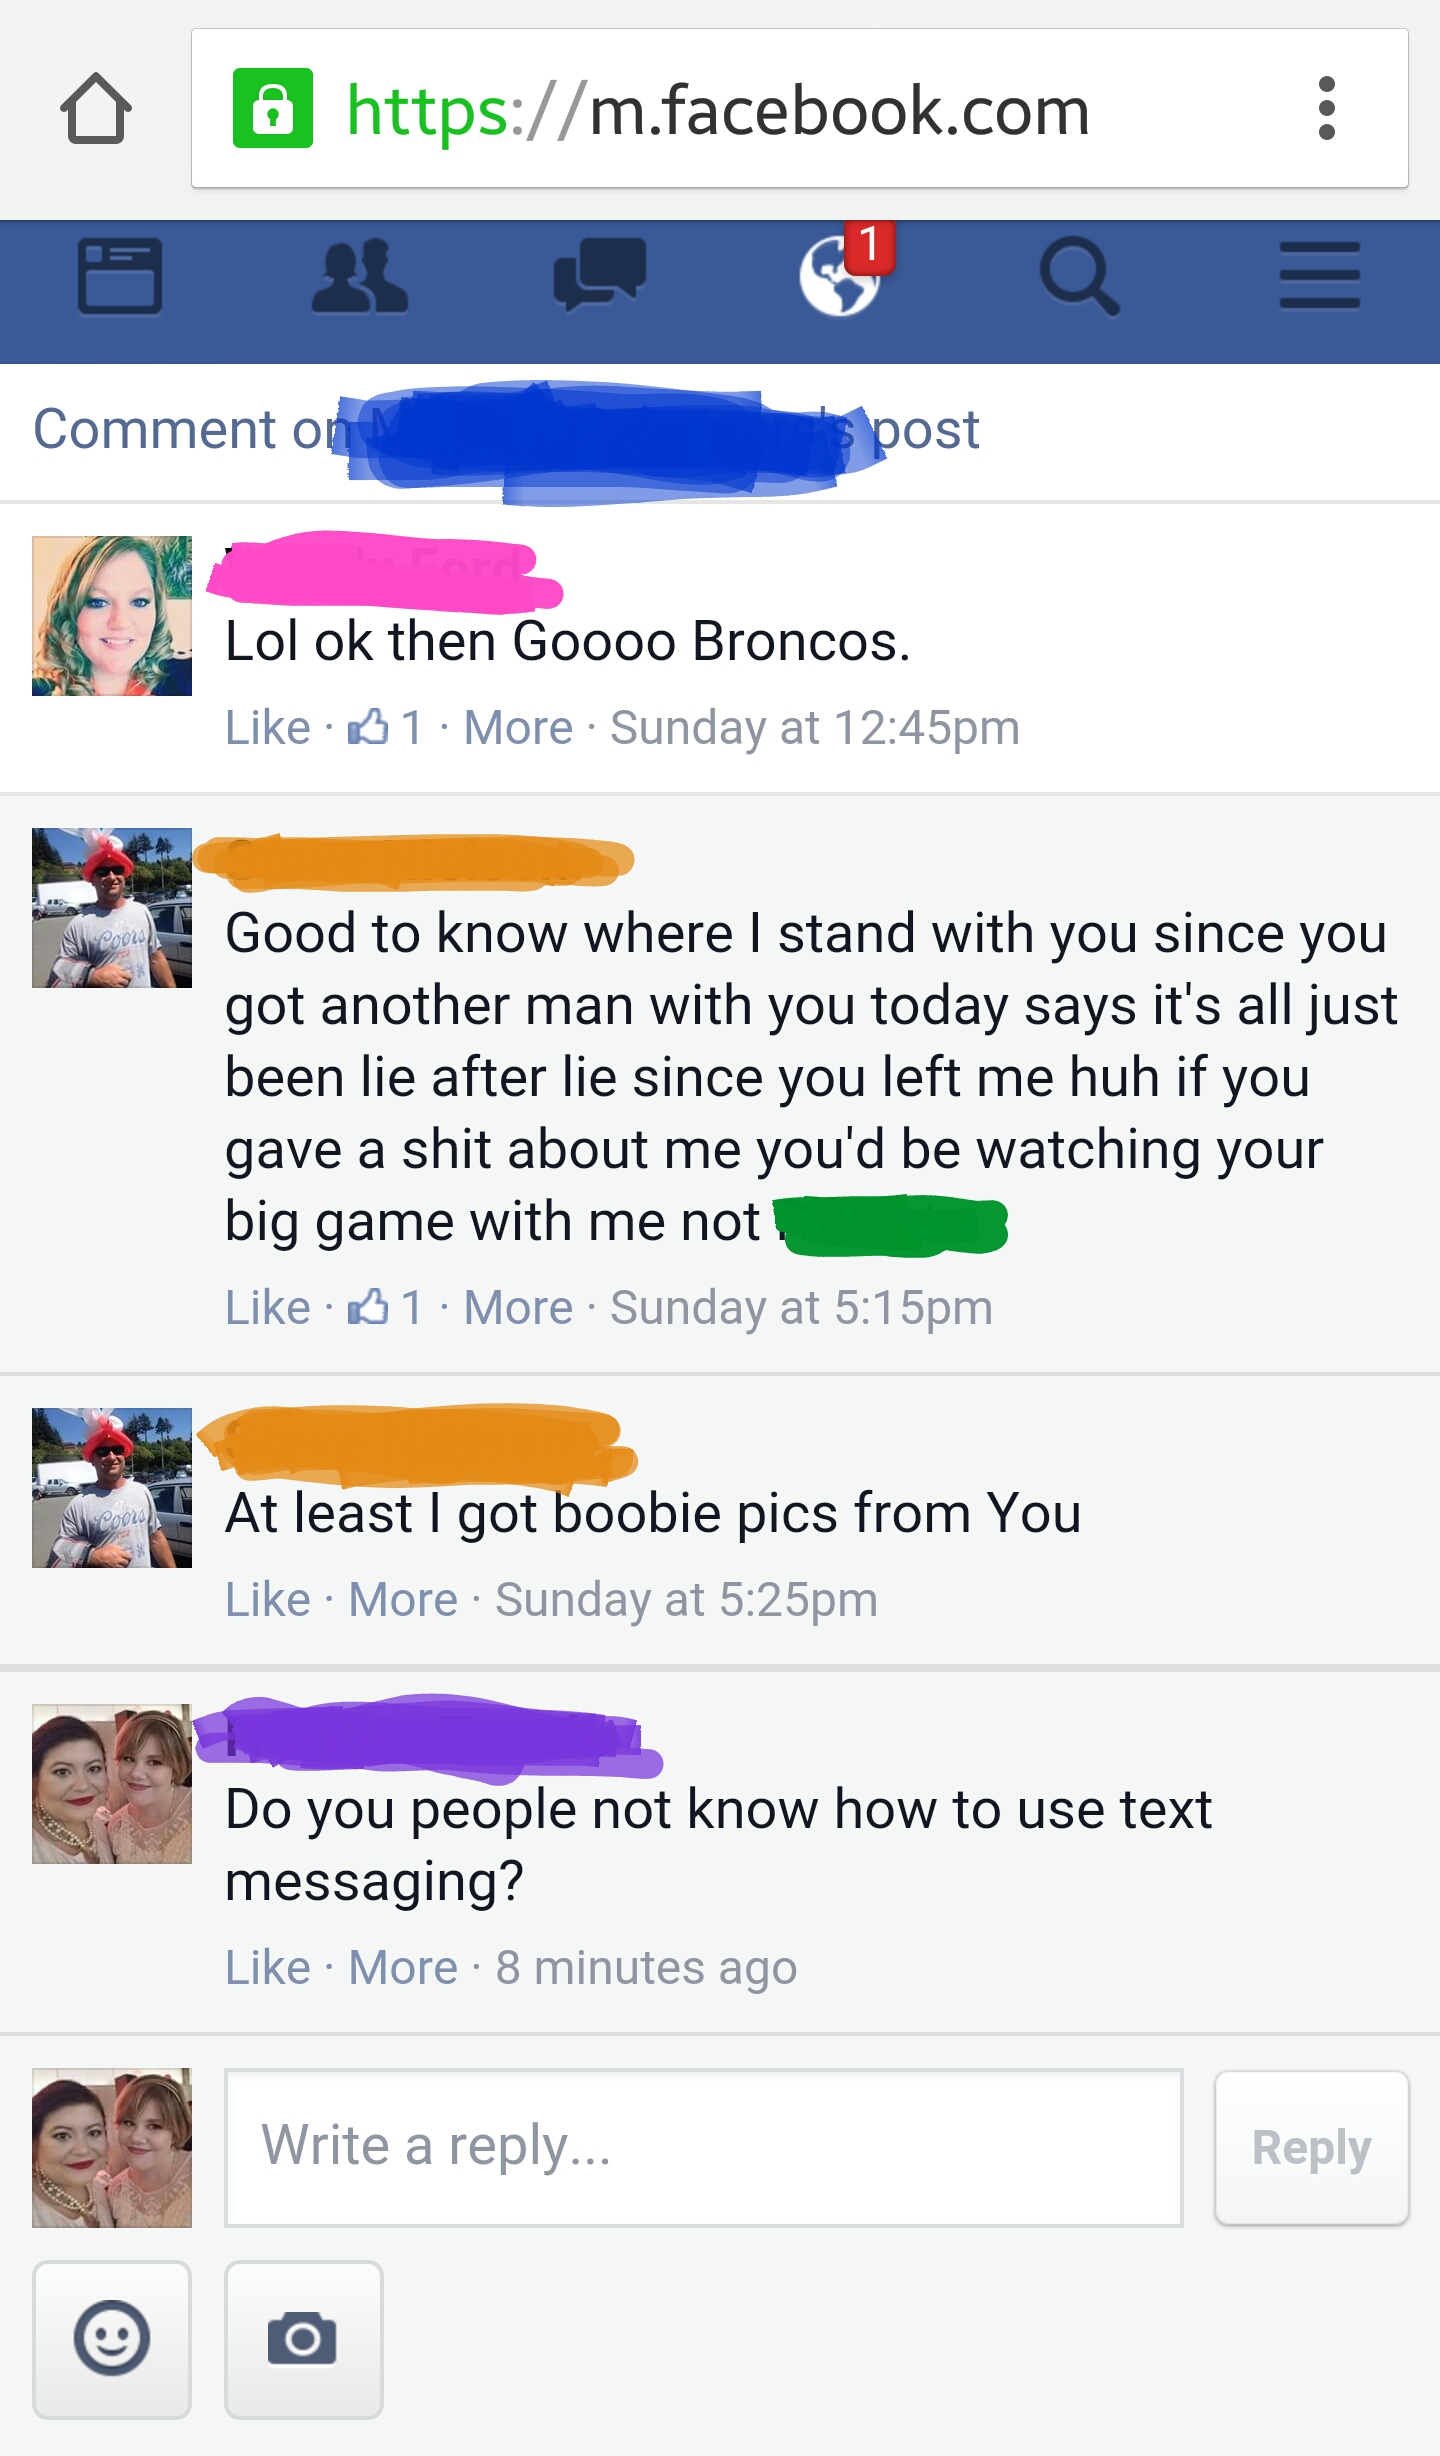 web page - O @ Comment og post Lol ok then Goooo Broncos. 1 More Sunday at pm Good to know where I stand with you since you got another man with you today says it's all just been lie after lie since you left me huh if you gave a shit about me you'd be wat